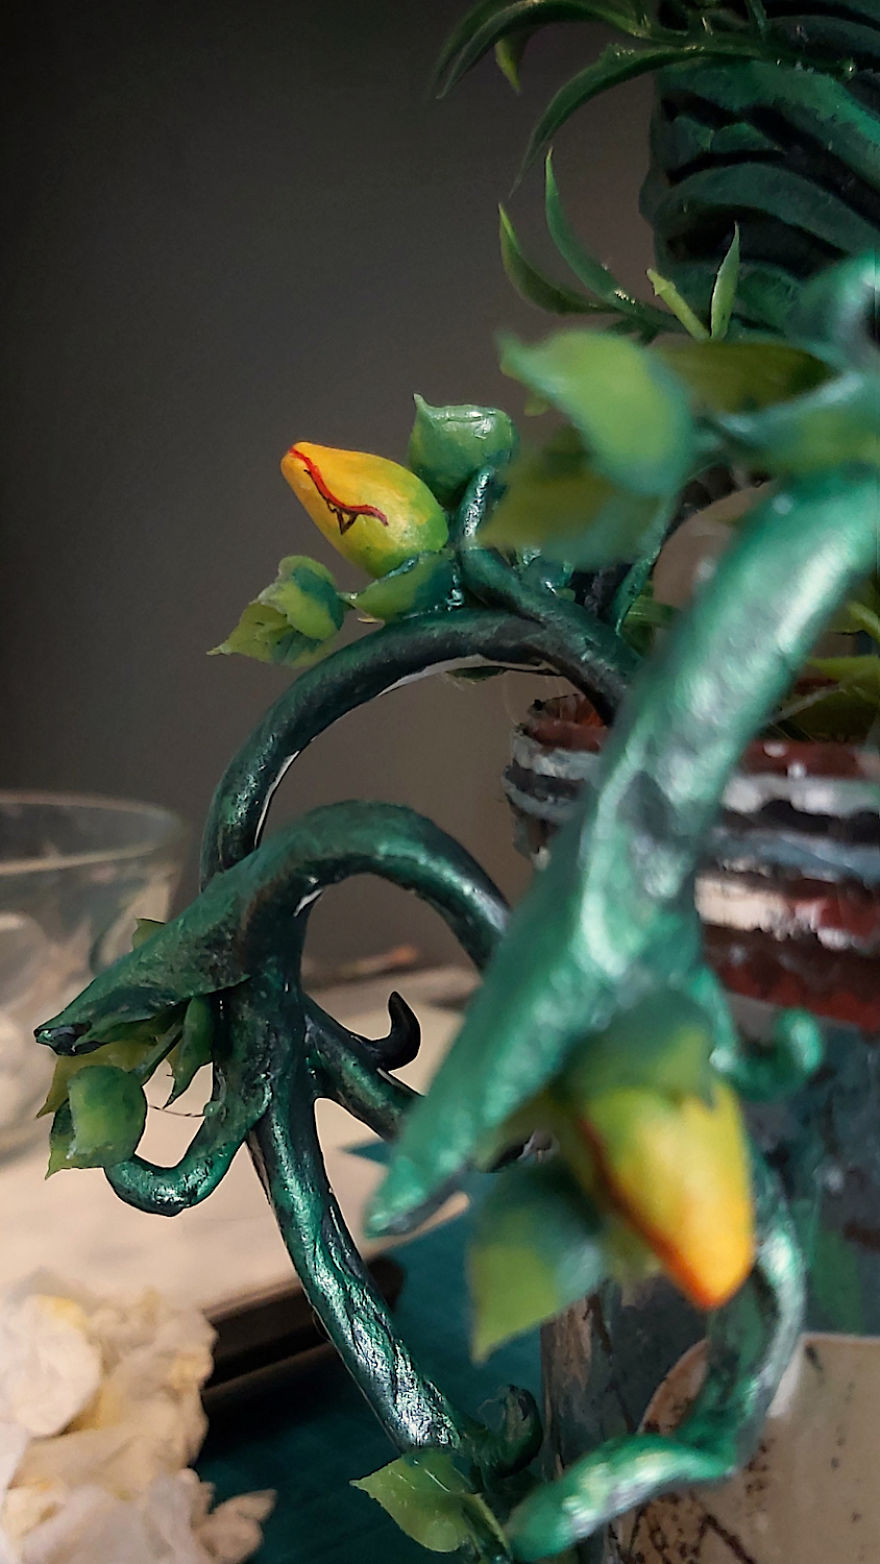 I Handcrafted Audrey 2 From “Little Shop Of Horrors” From Materials I Had At Home During The Quarantine